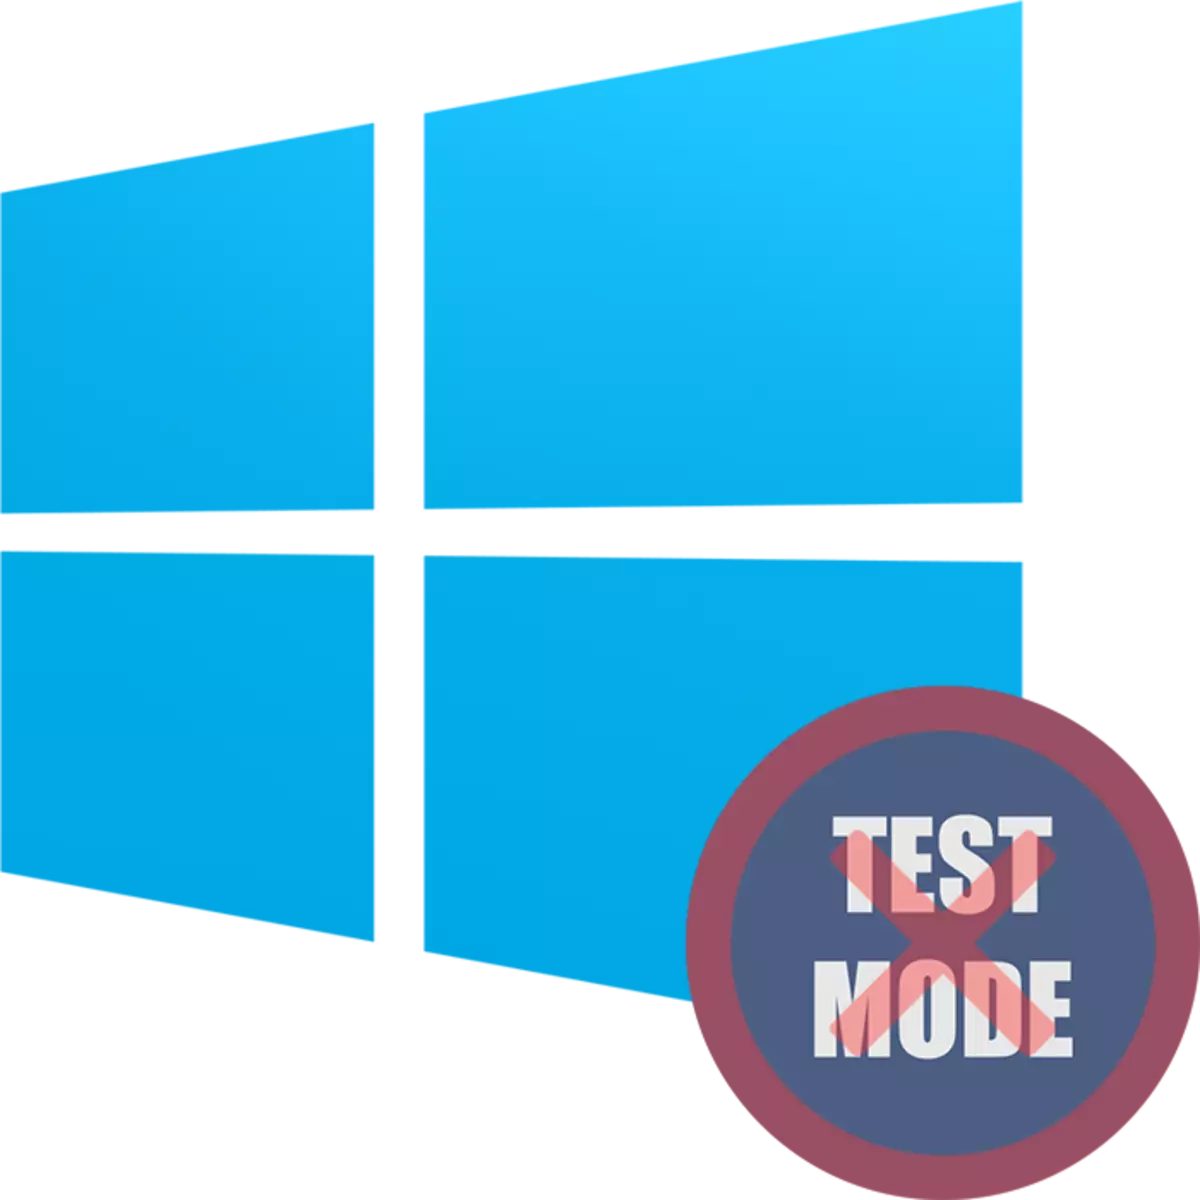 How to disable test mode in Windows 10